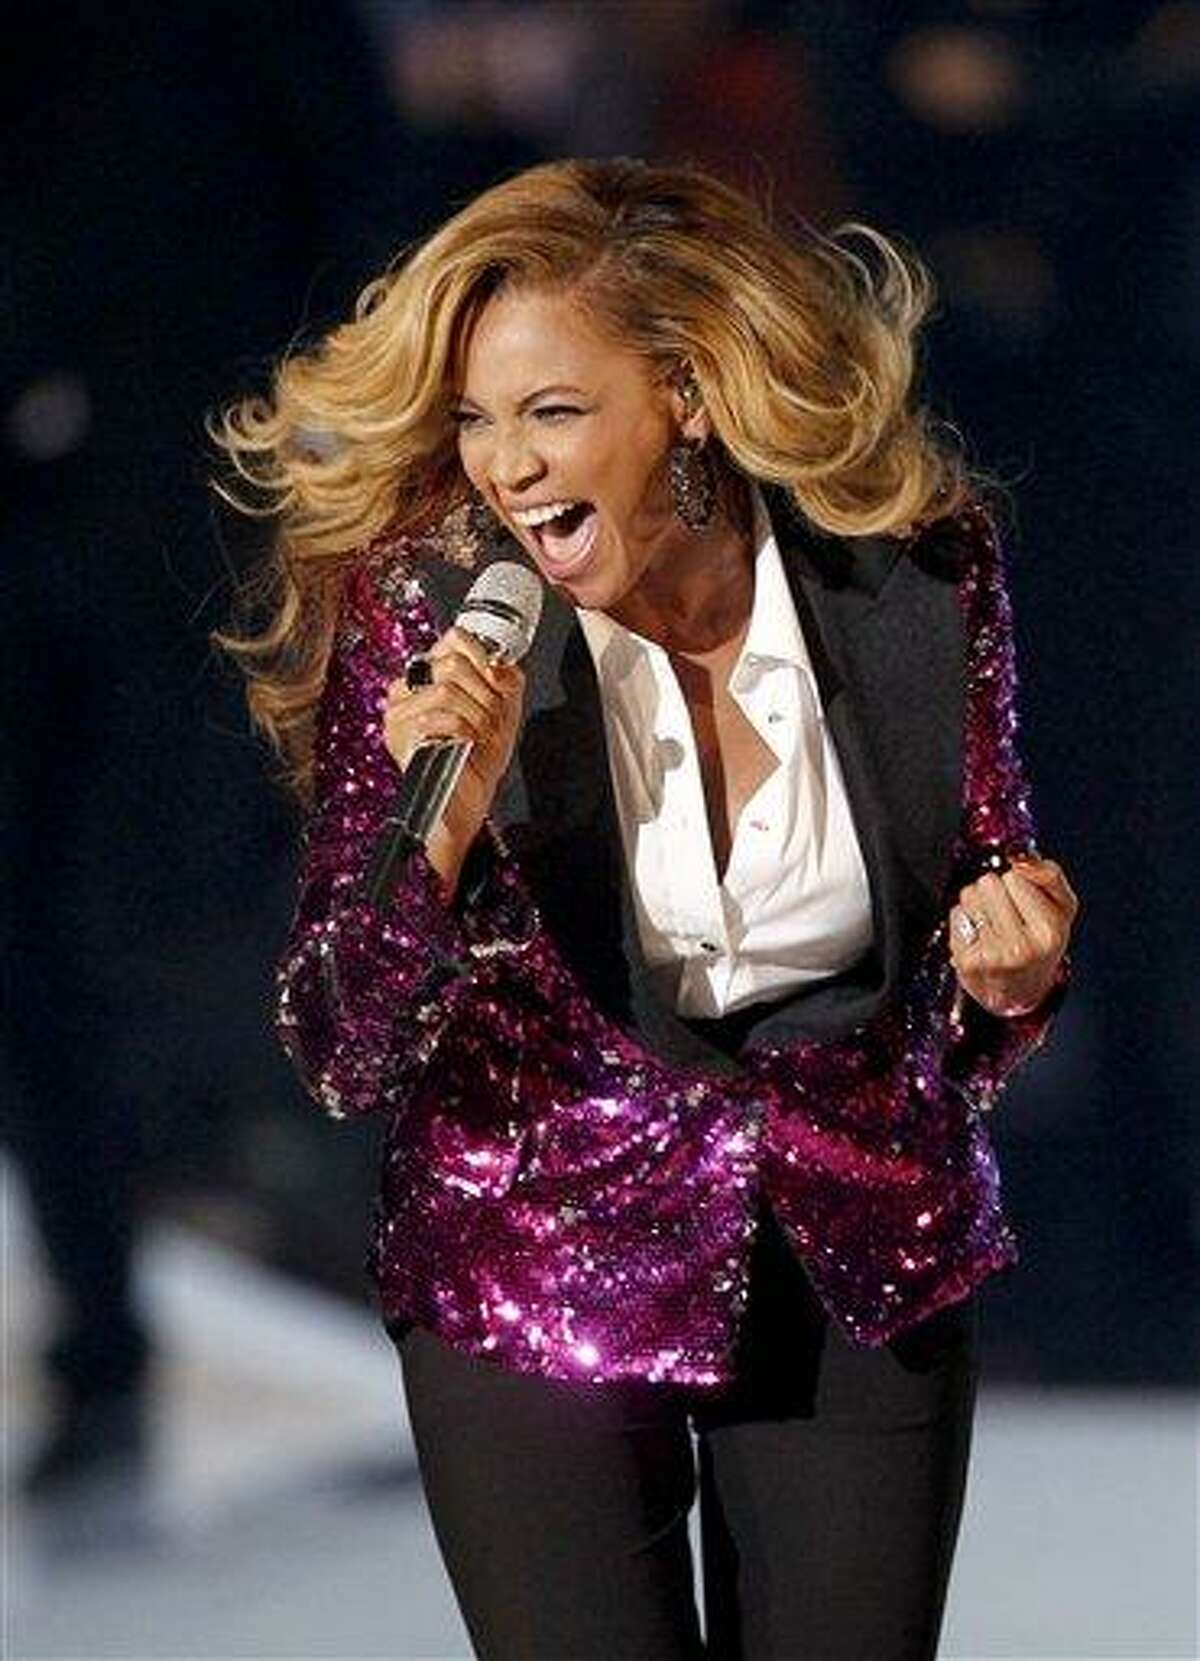 Beyonce performs at the MTV Video Music Awards on Sunday Aug. 28, 2011, in Los Angeles. (AP Photo/Matt Sayles)